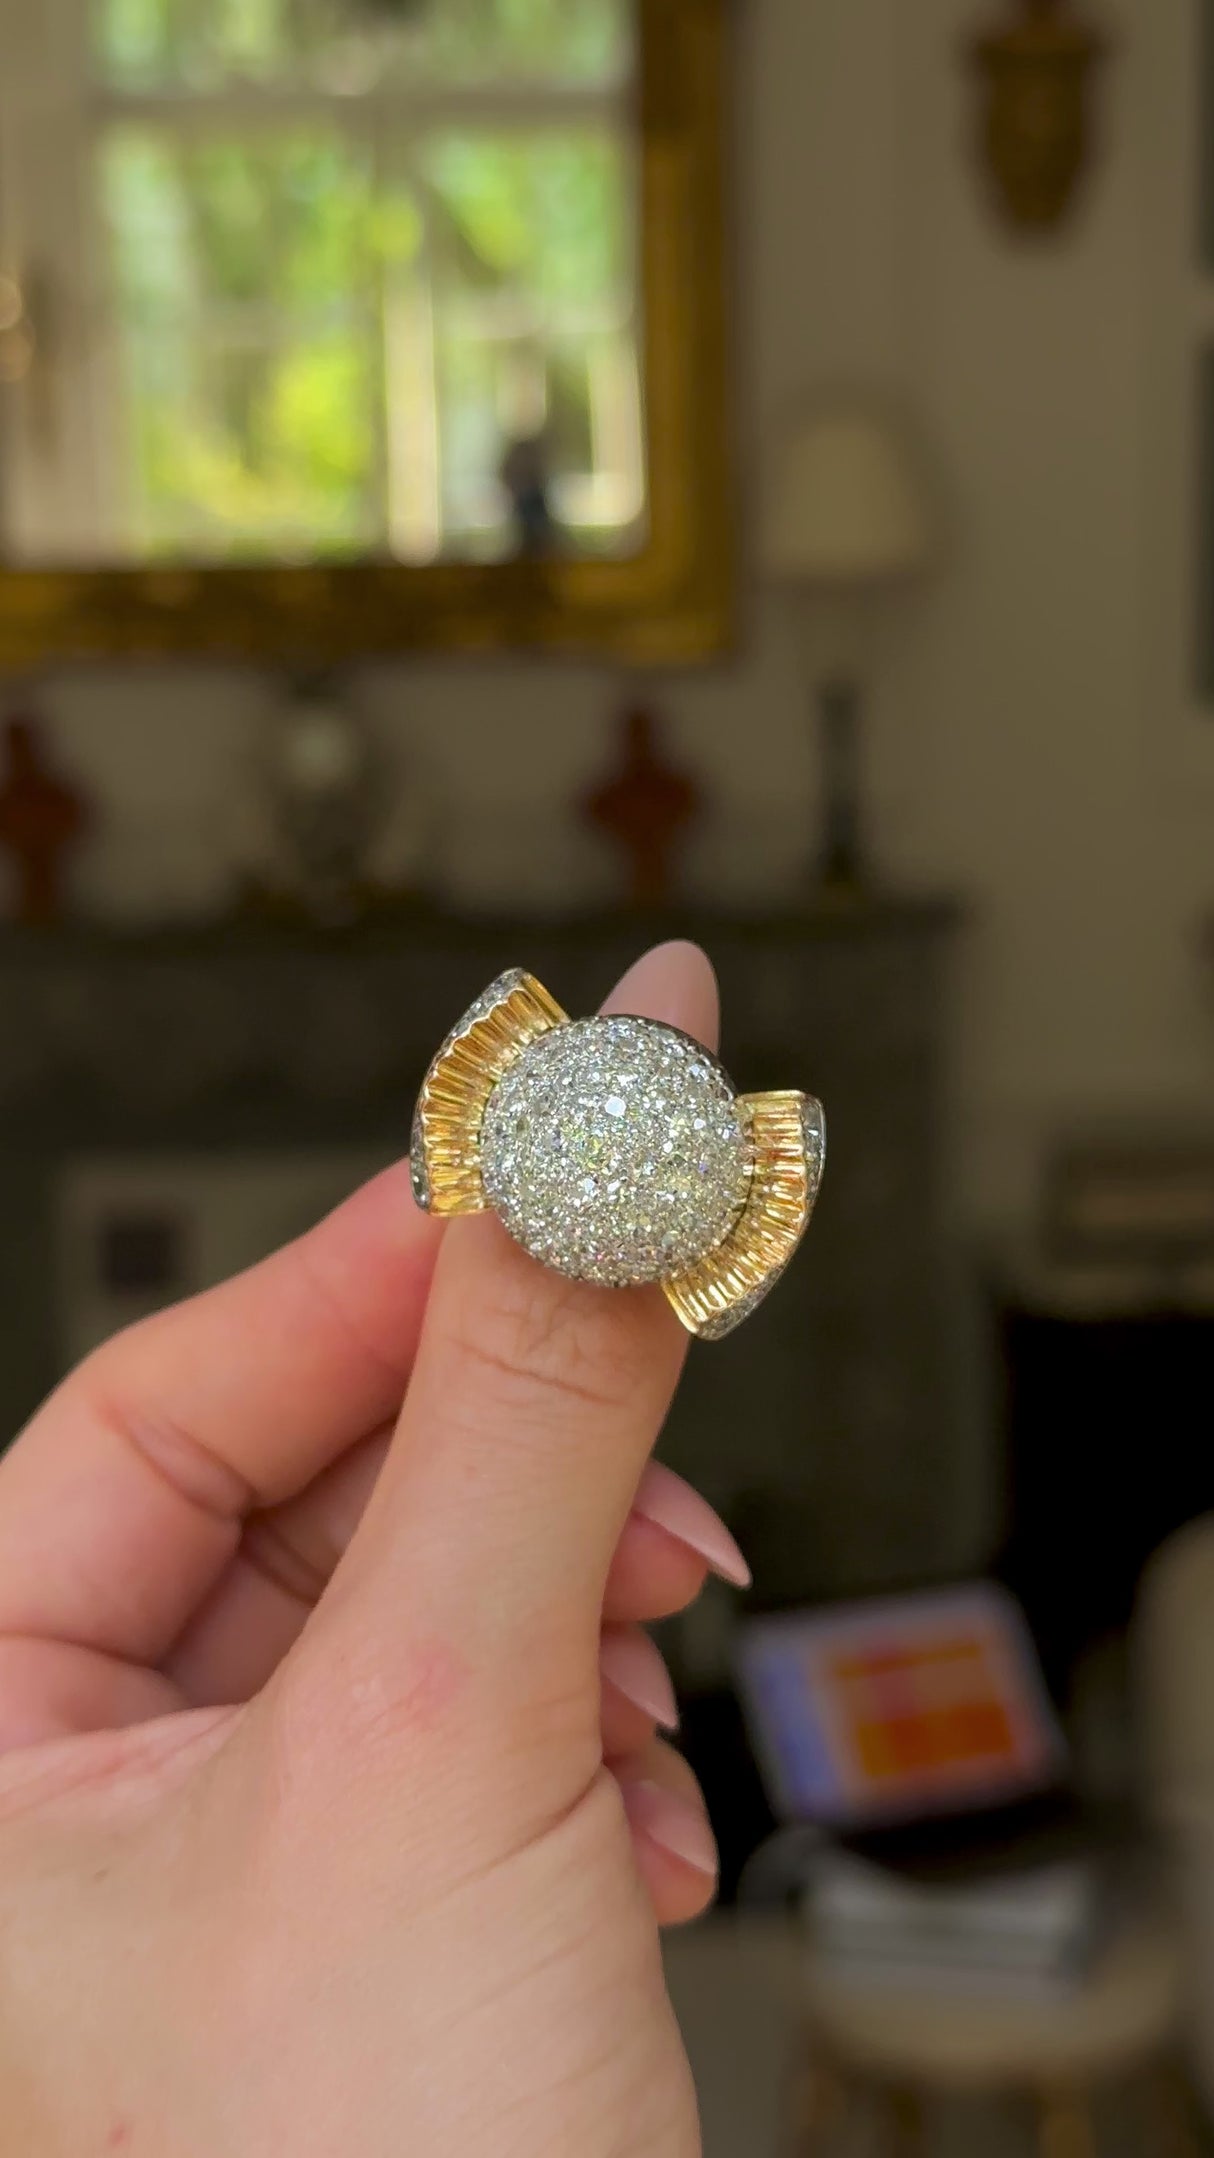 Cartier diamond bombe ring held in fingers and moved around to give perspective.